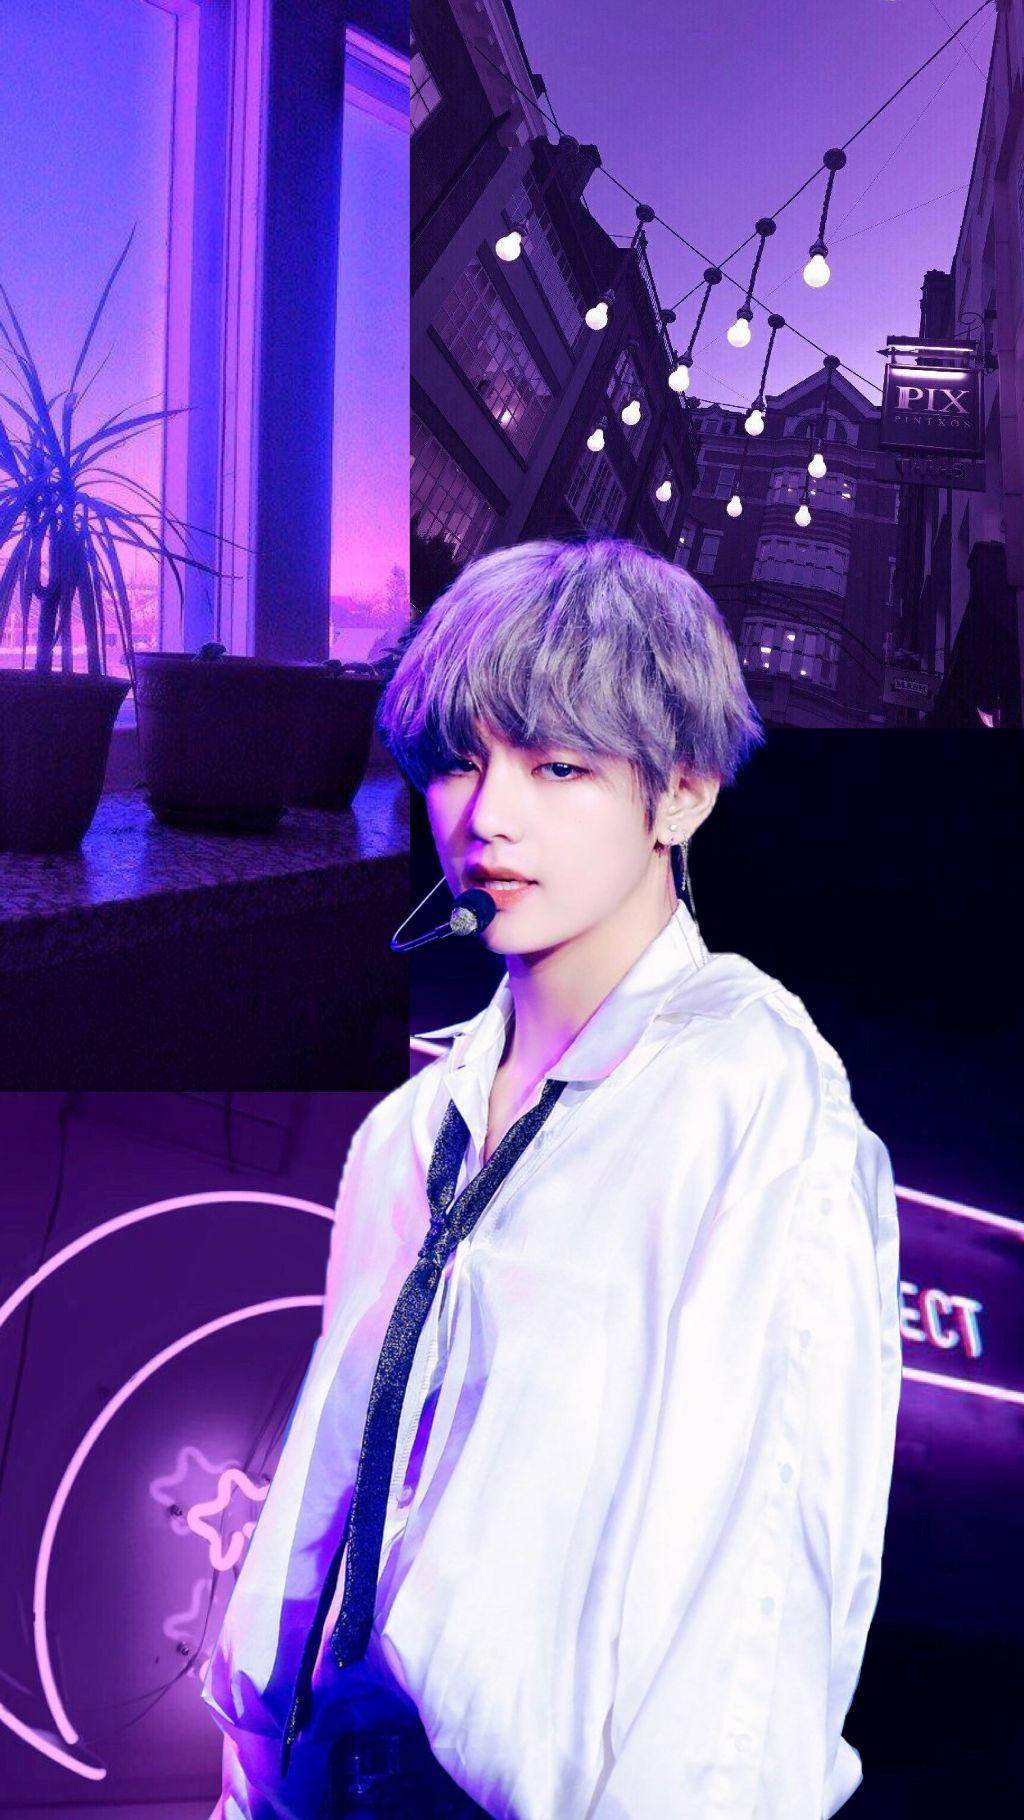 Taehyung Cute On Purple Stage Wallpaper